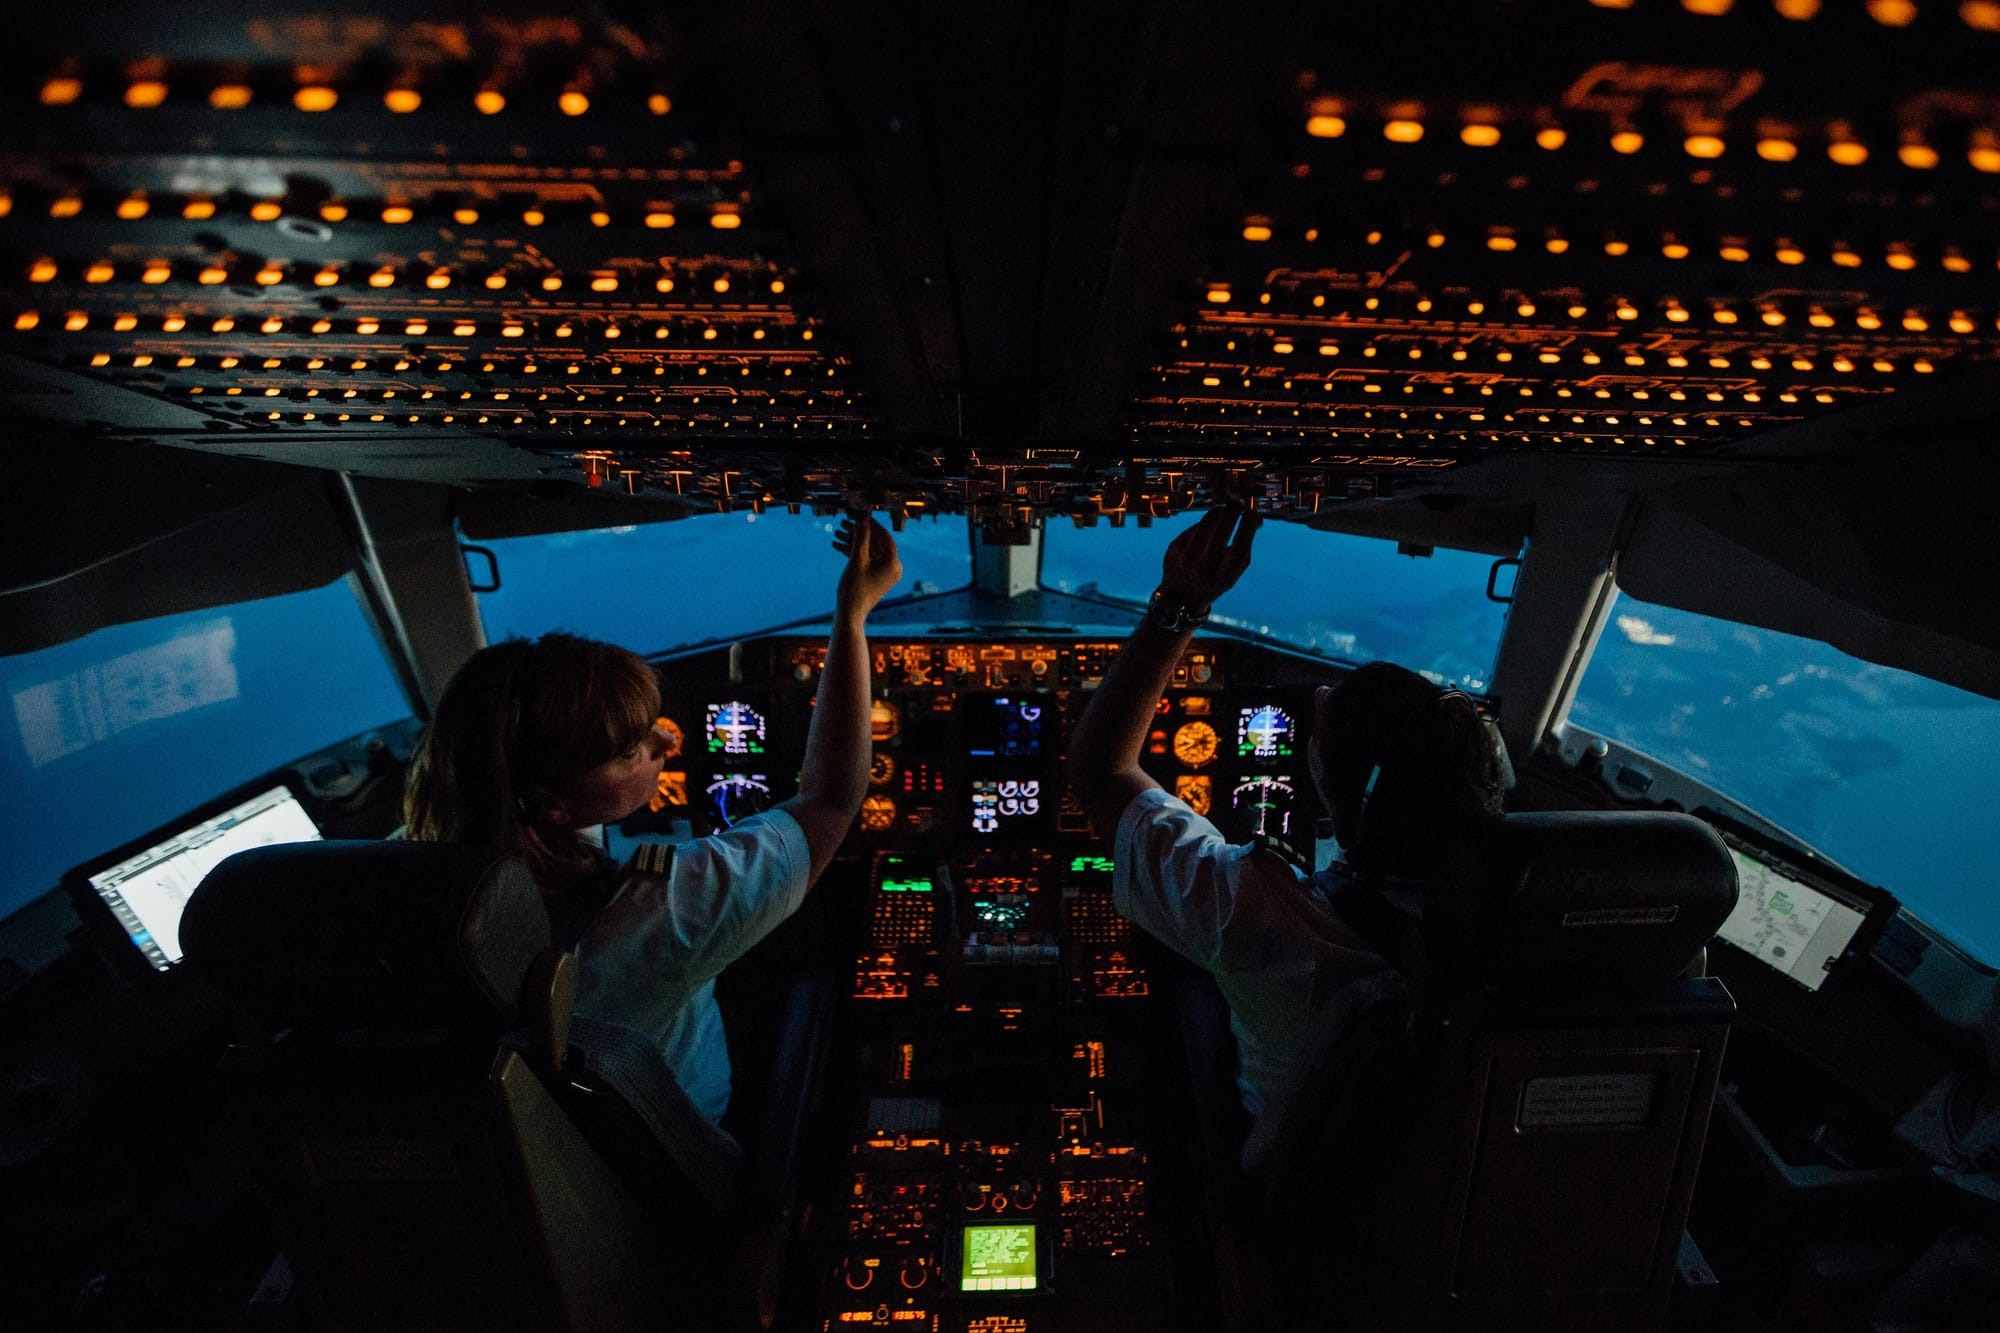 Who Is Allowed in the Cockpit of an Airplane?